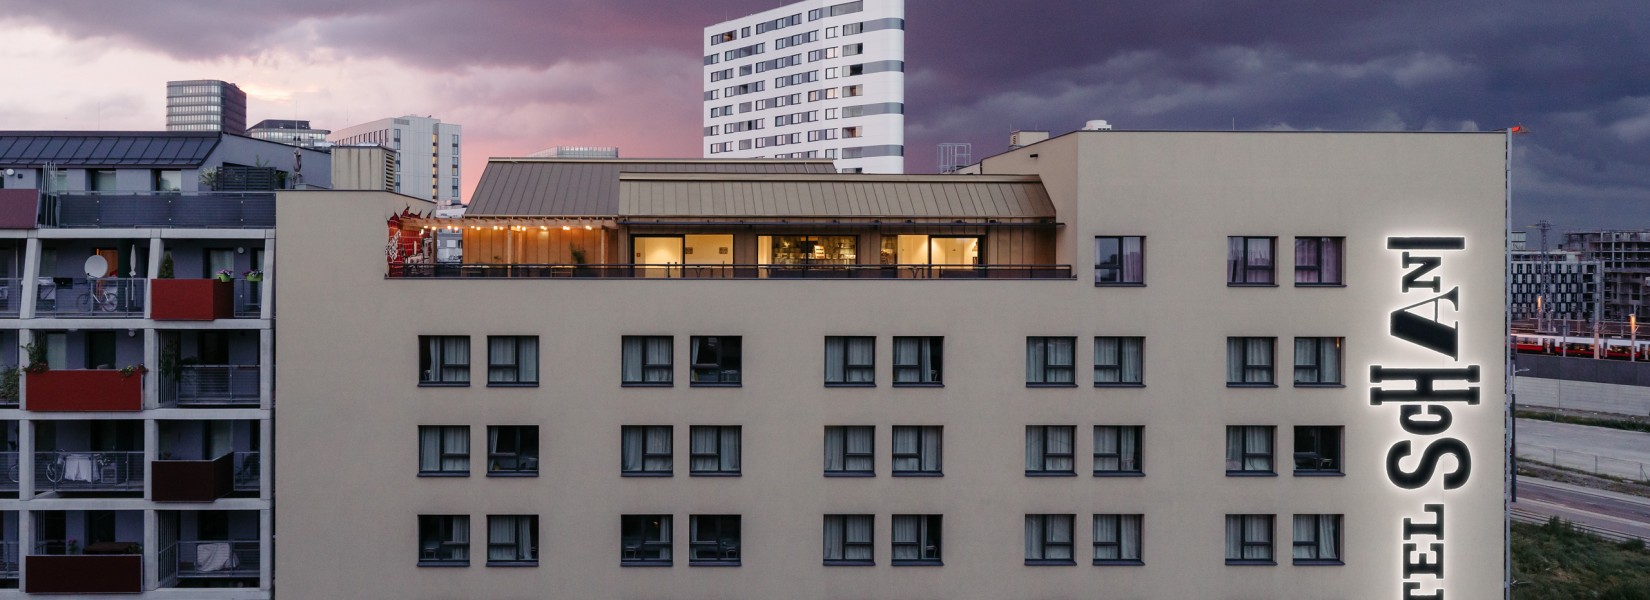 House facade of the Hotel Schani Wien with view of the Rooftop Event Space at dusk 